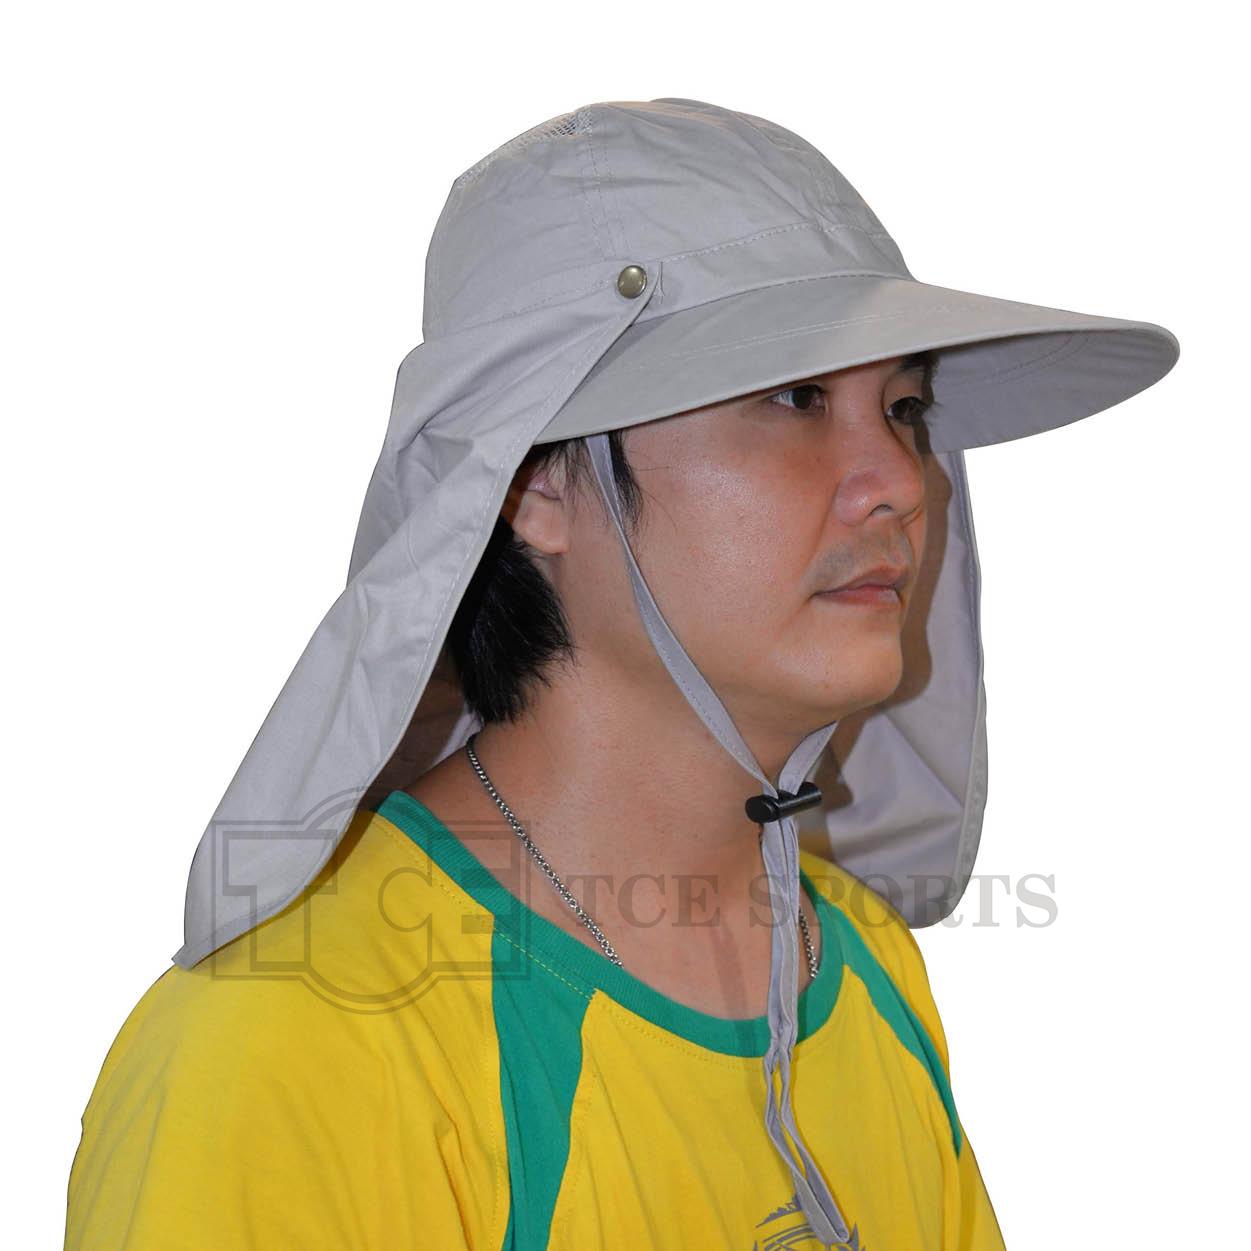 Seahawk - Fishing Cap With Face Cover - JFC02 02